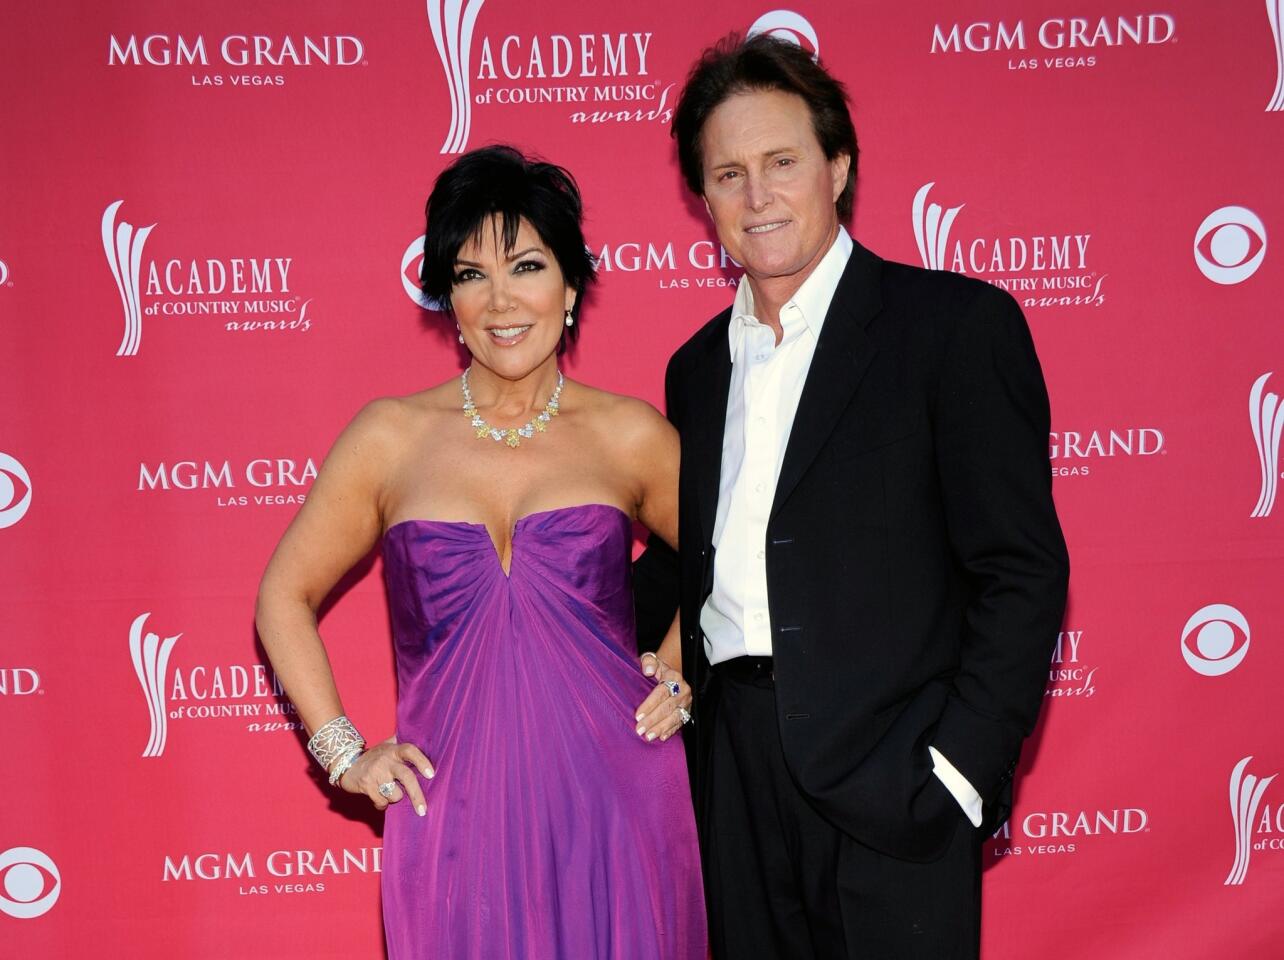 Kris Jenner split with Bruce Jenner, husband of 22 years, amicable